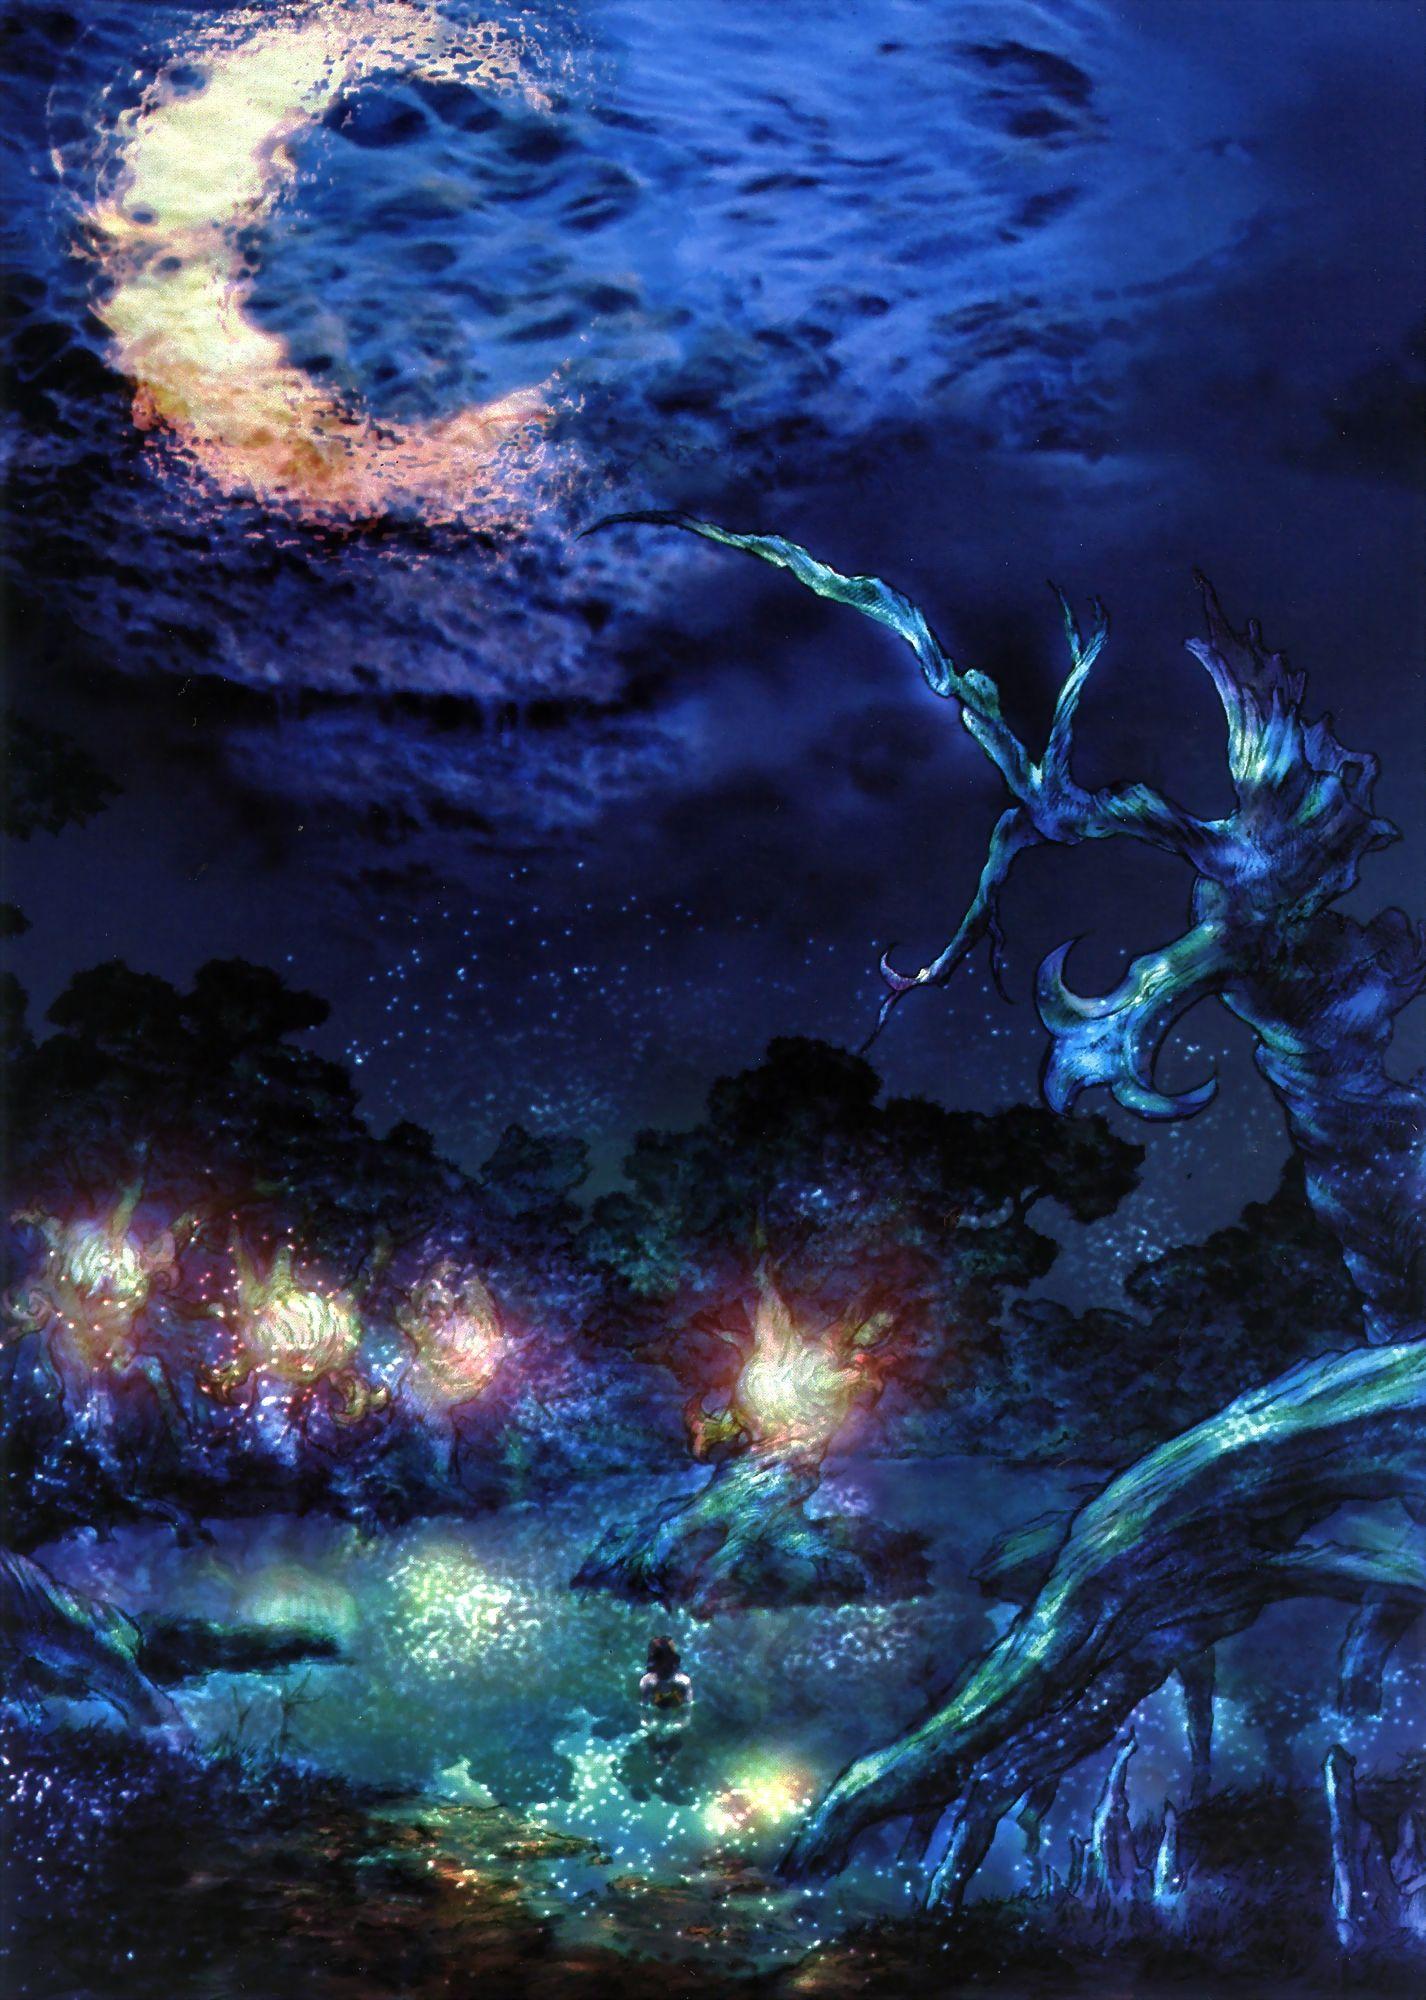 Final Fantasy Iphone Wallpapers Top Free Final Fantasy Iphone Backgrounds Wallpaperaccess